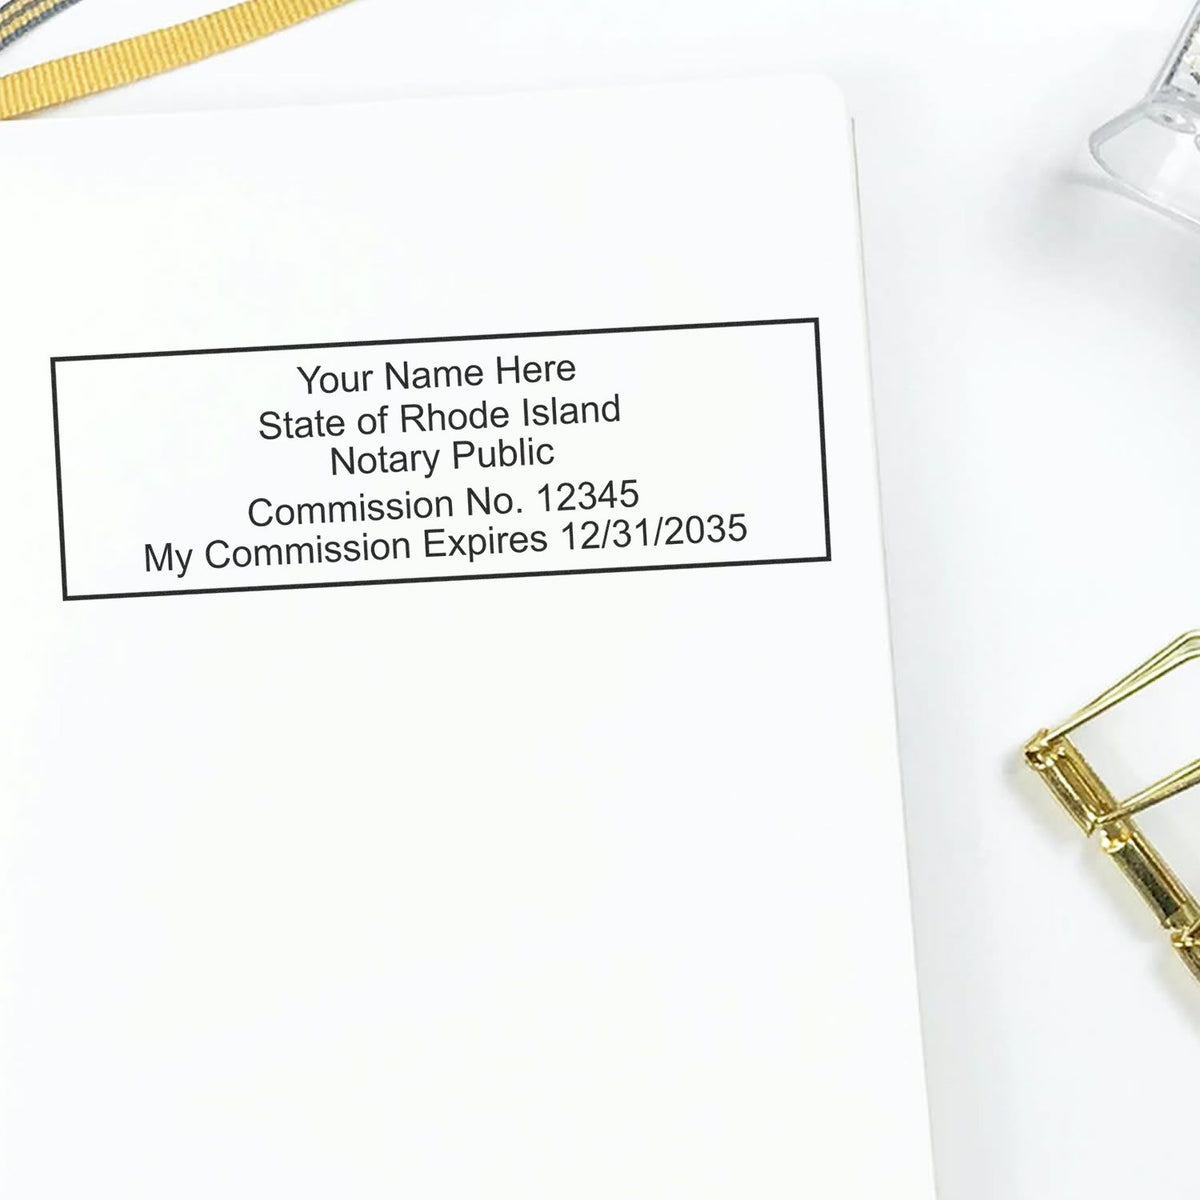 A photograph of the MaxLight Premium Pre-Inked Rhode Island Rectangular Notarial Stamp stamp impression reveals a vivid, professional image of the on paper.